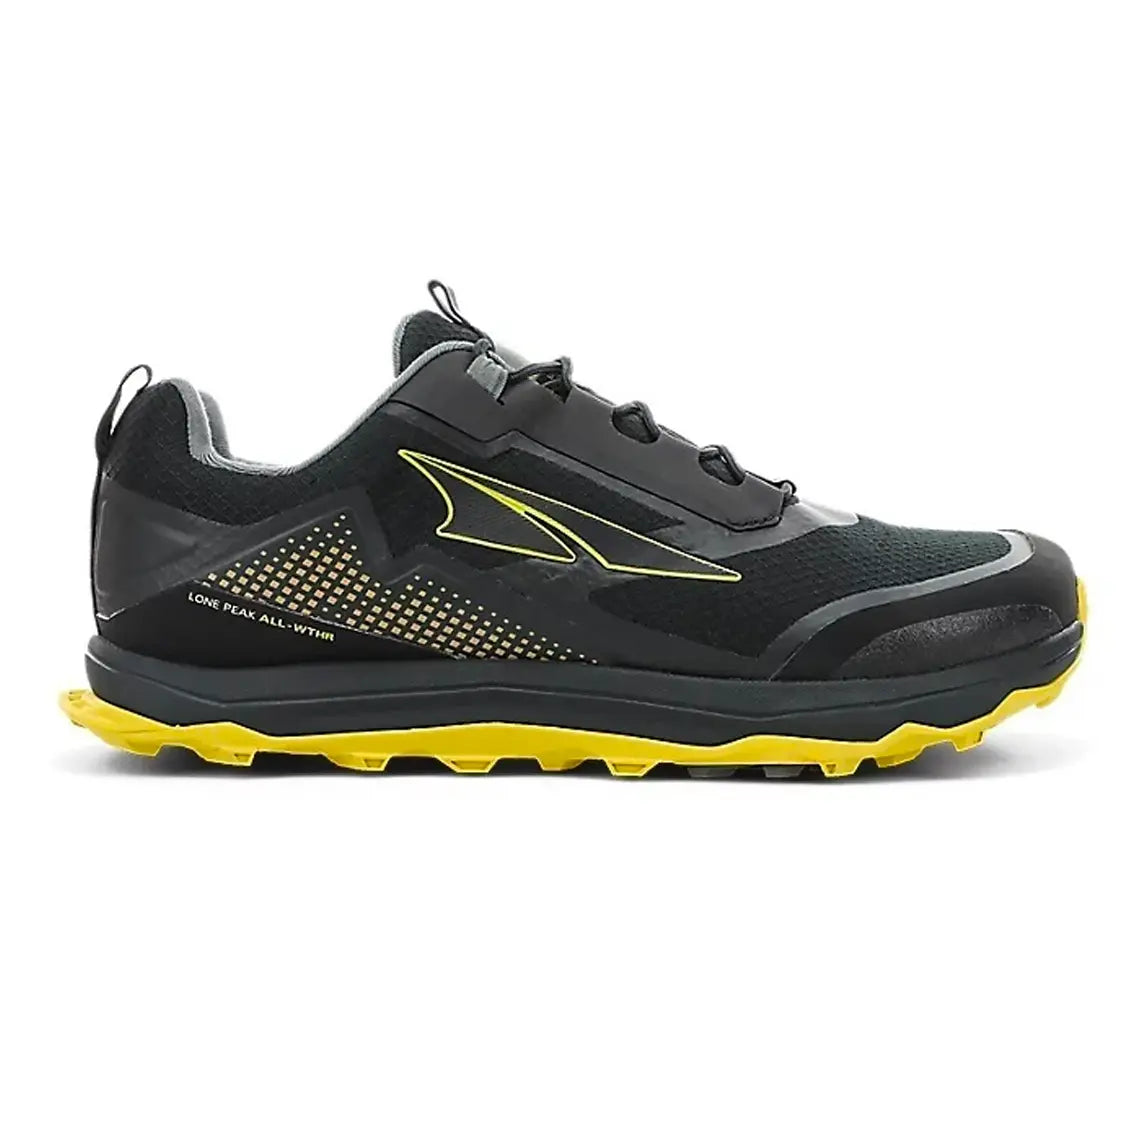 Mens Altra Lone Peak Mid All Weather Low